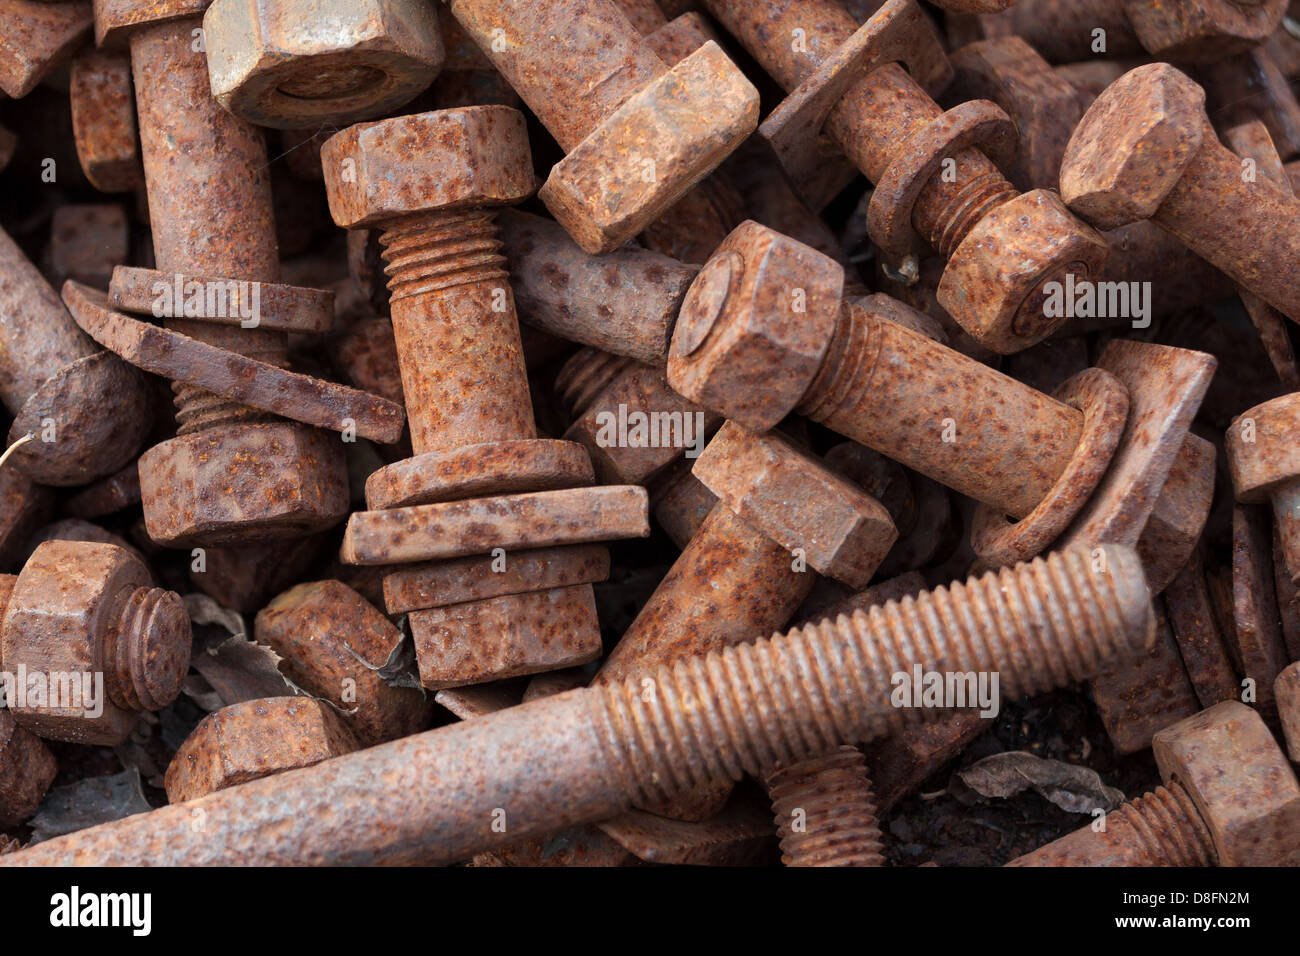 Bolts and nuts Stock Photo